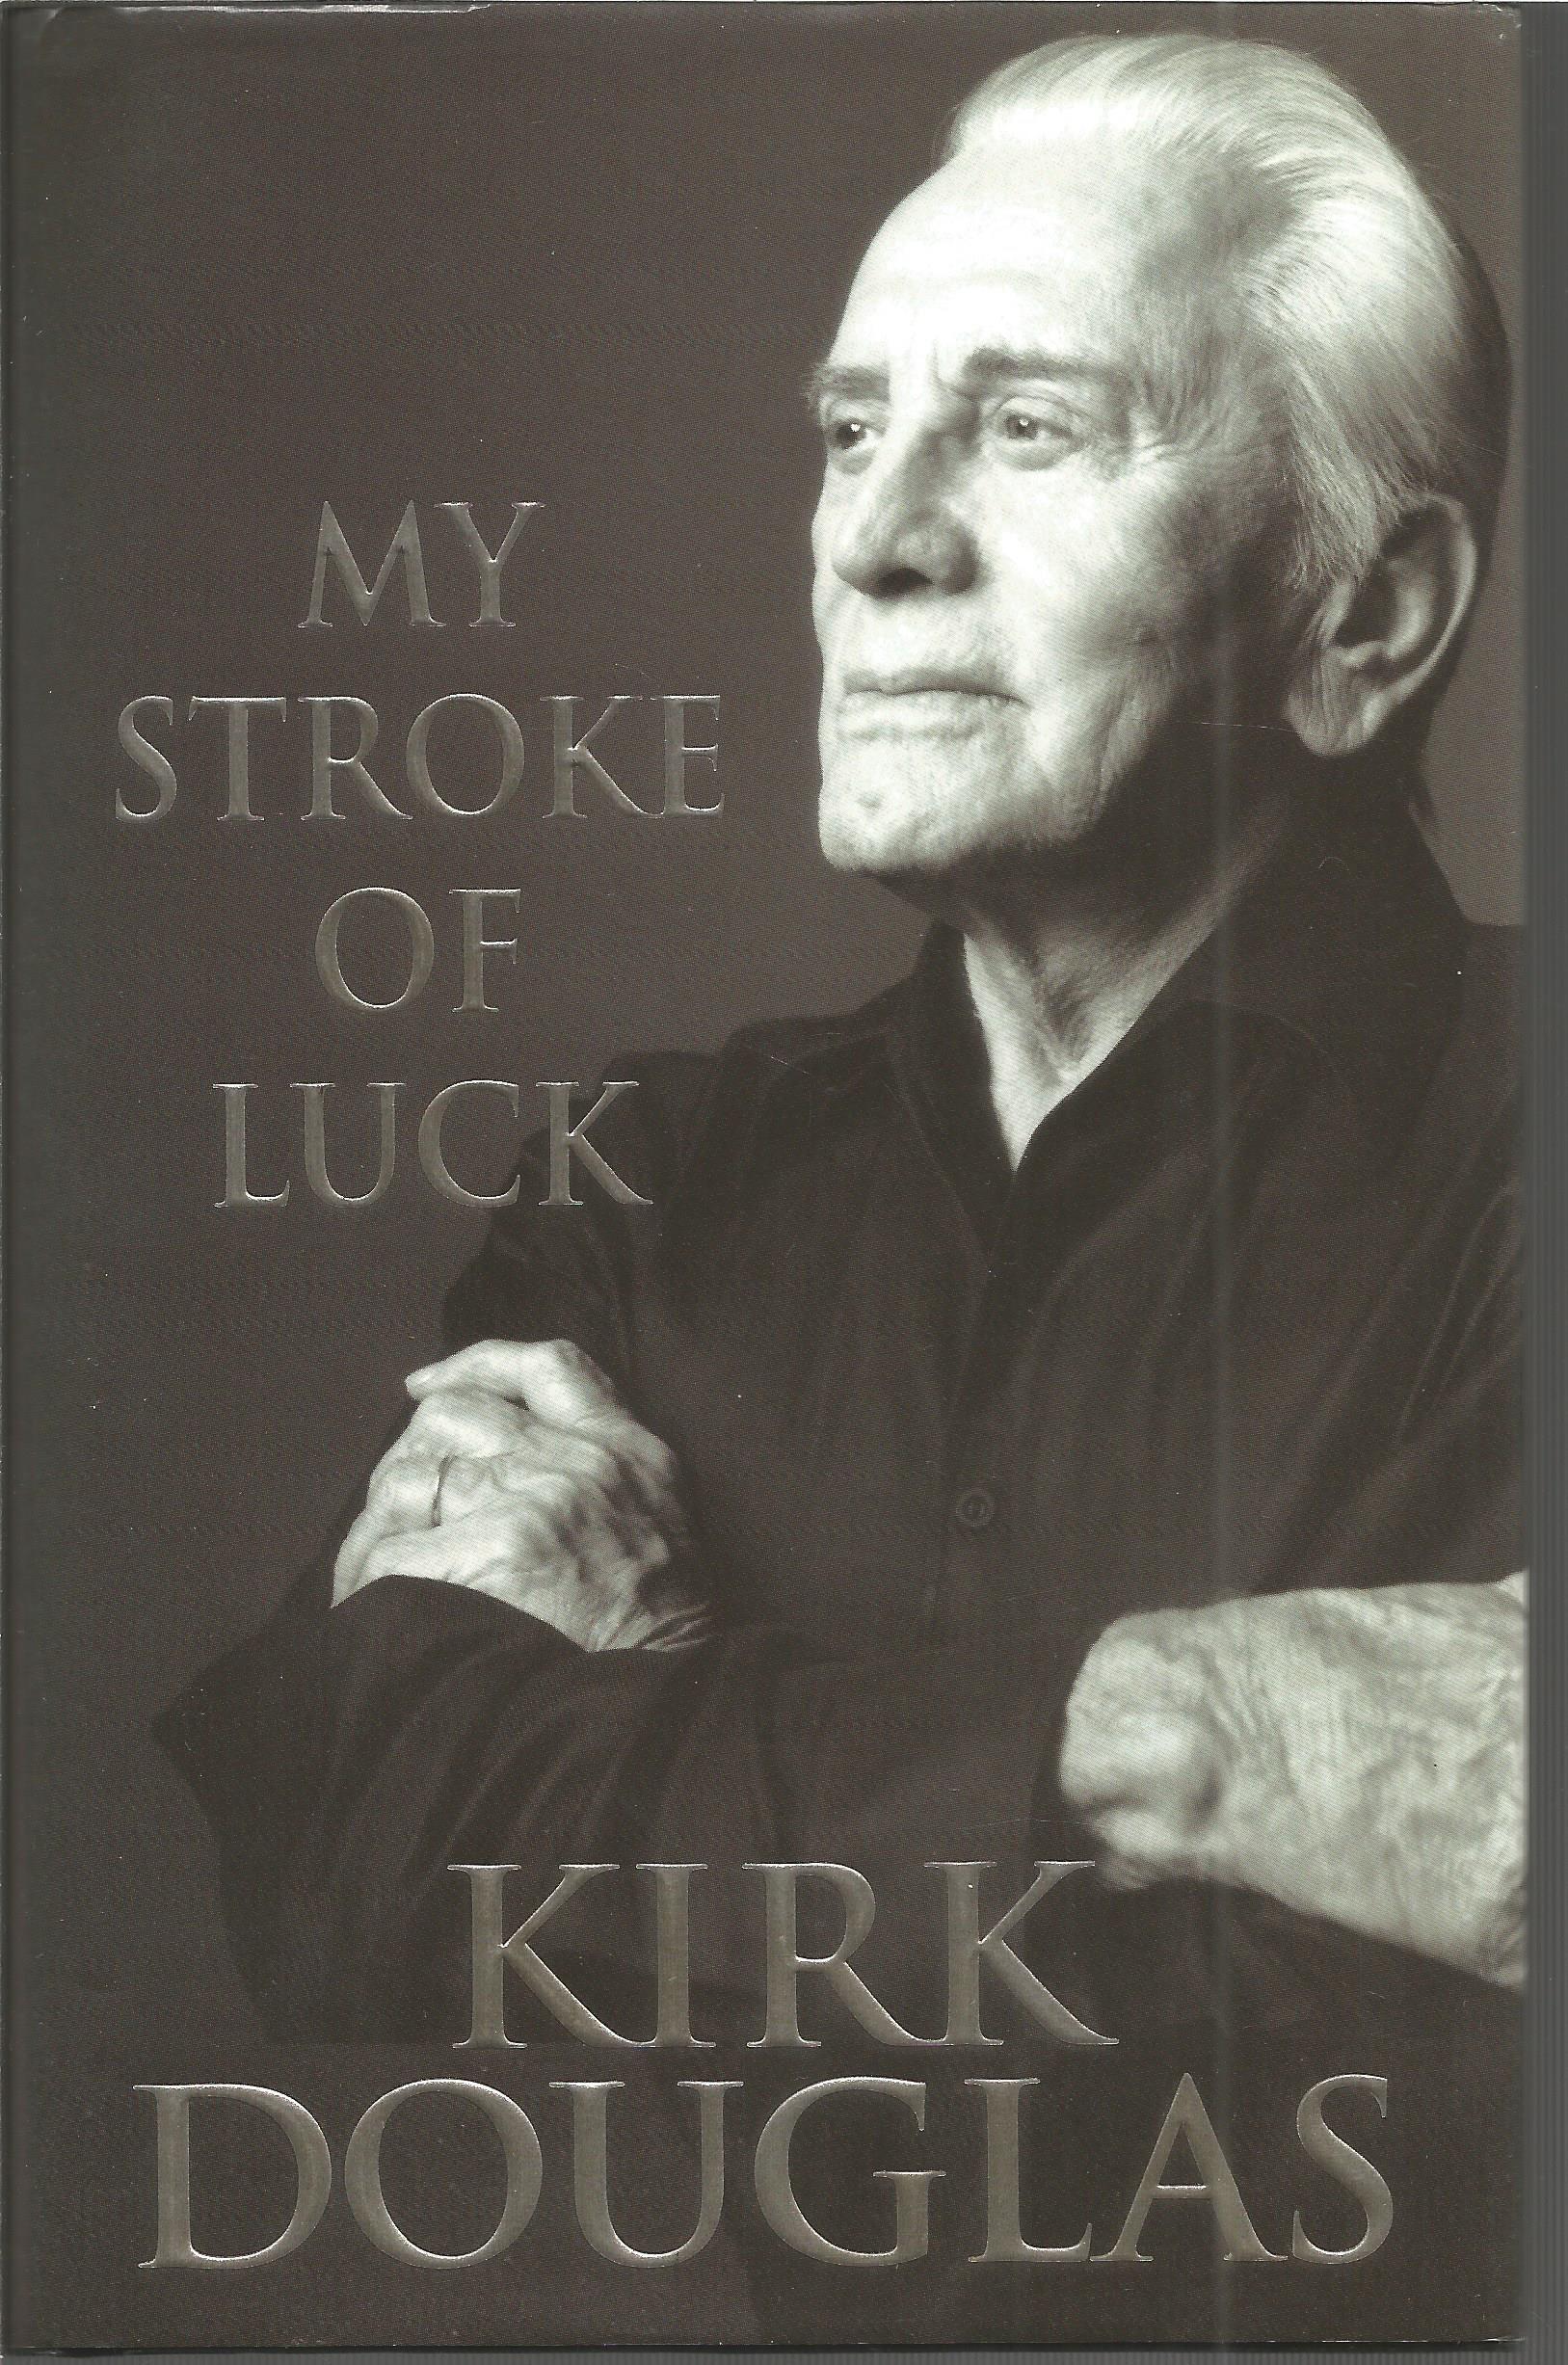 Kirk Douglas TLS dated 2/4/2001 regarding is book. Also comes with UNSIGNED copy of his book My